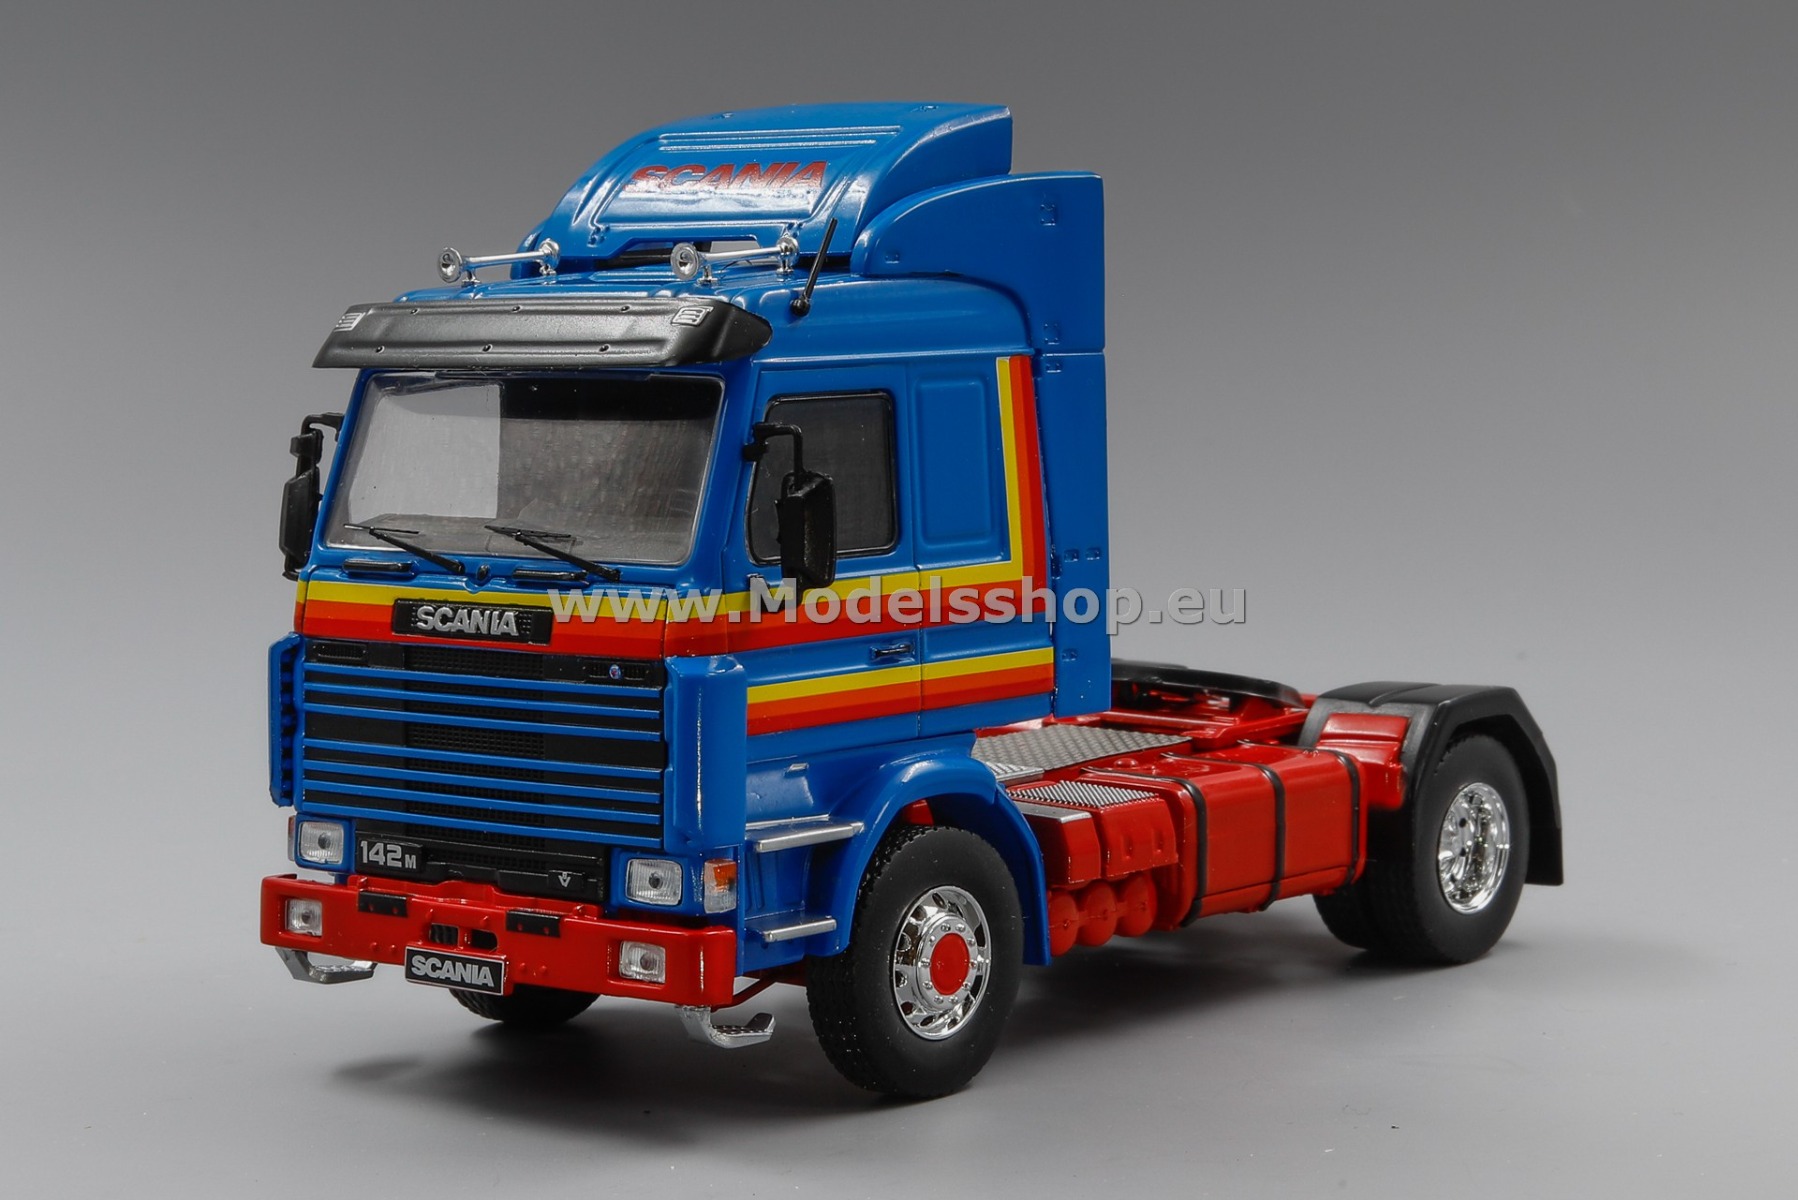 Scania 142M tractor truck, 1981 /blue/